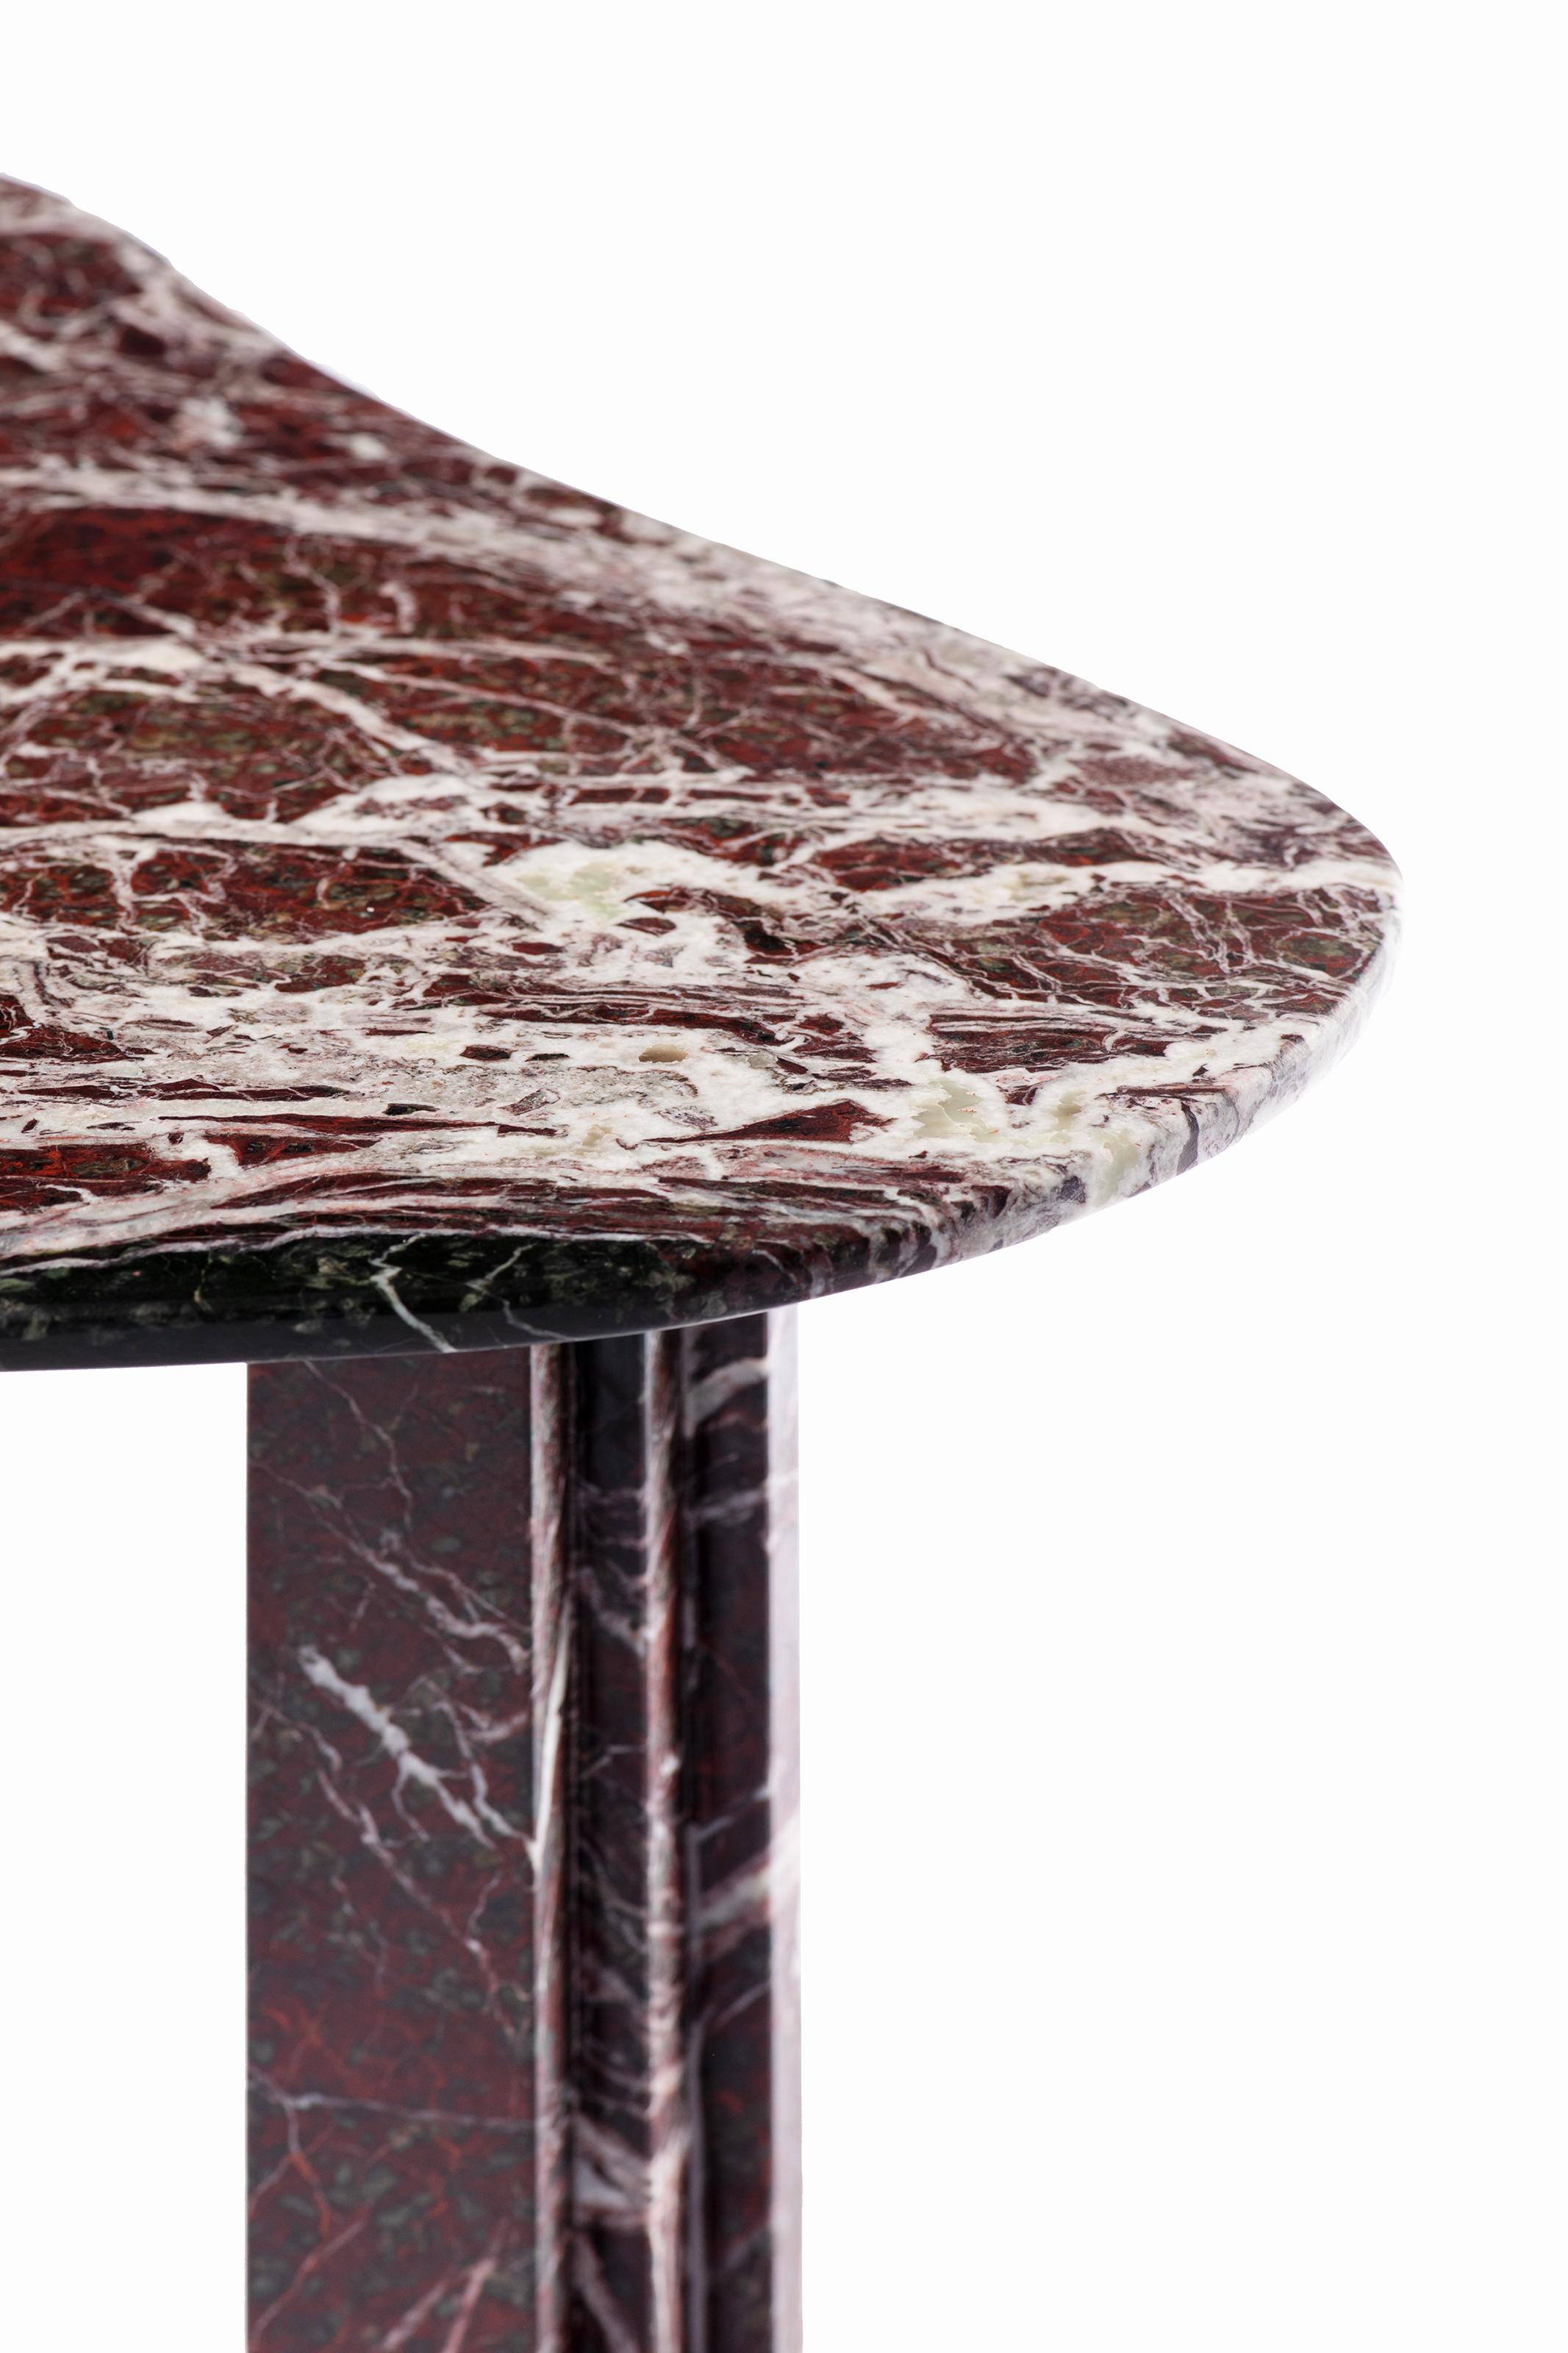 Sculptural red marble table - Lorenzo Bini

Title: She said

Measures: 
- dining table 190 x 125 x h 73,5 cm
- coffee table 95 x 63 x h 37 cm

Material: Rosso Levanto


SIX TABLEAUX is a series of marble tables designed by Lorenzo Bini